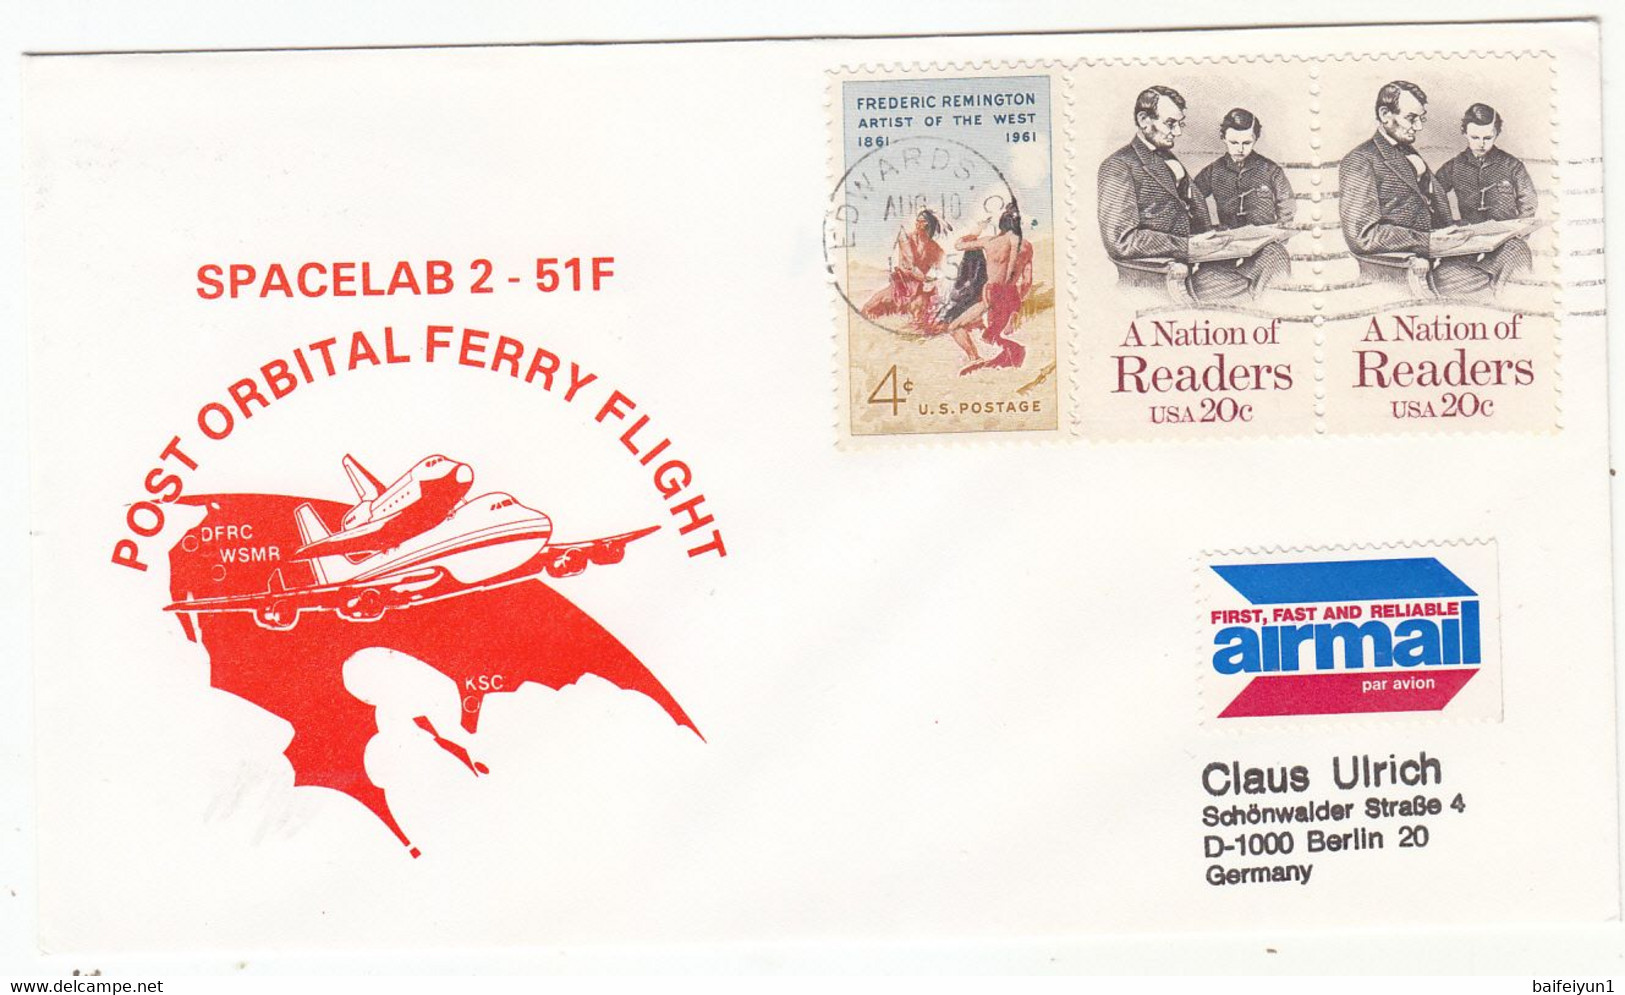 1985 USA  Space Shuttle Challenger STS-51F Mission And Post Orbit Ferry Flight Commemorative Cover - North  America